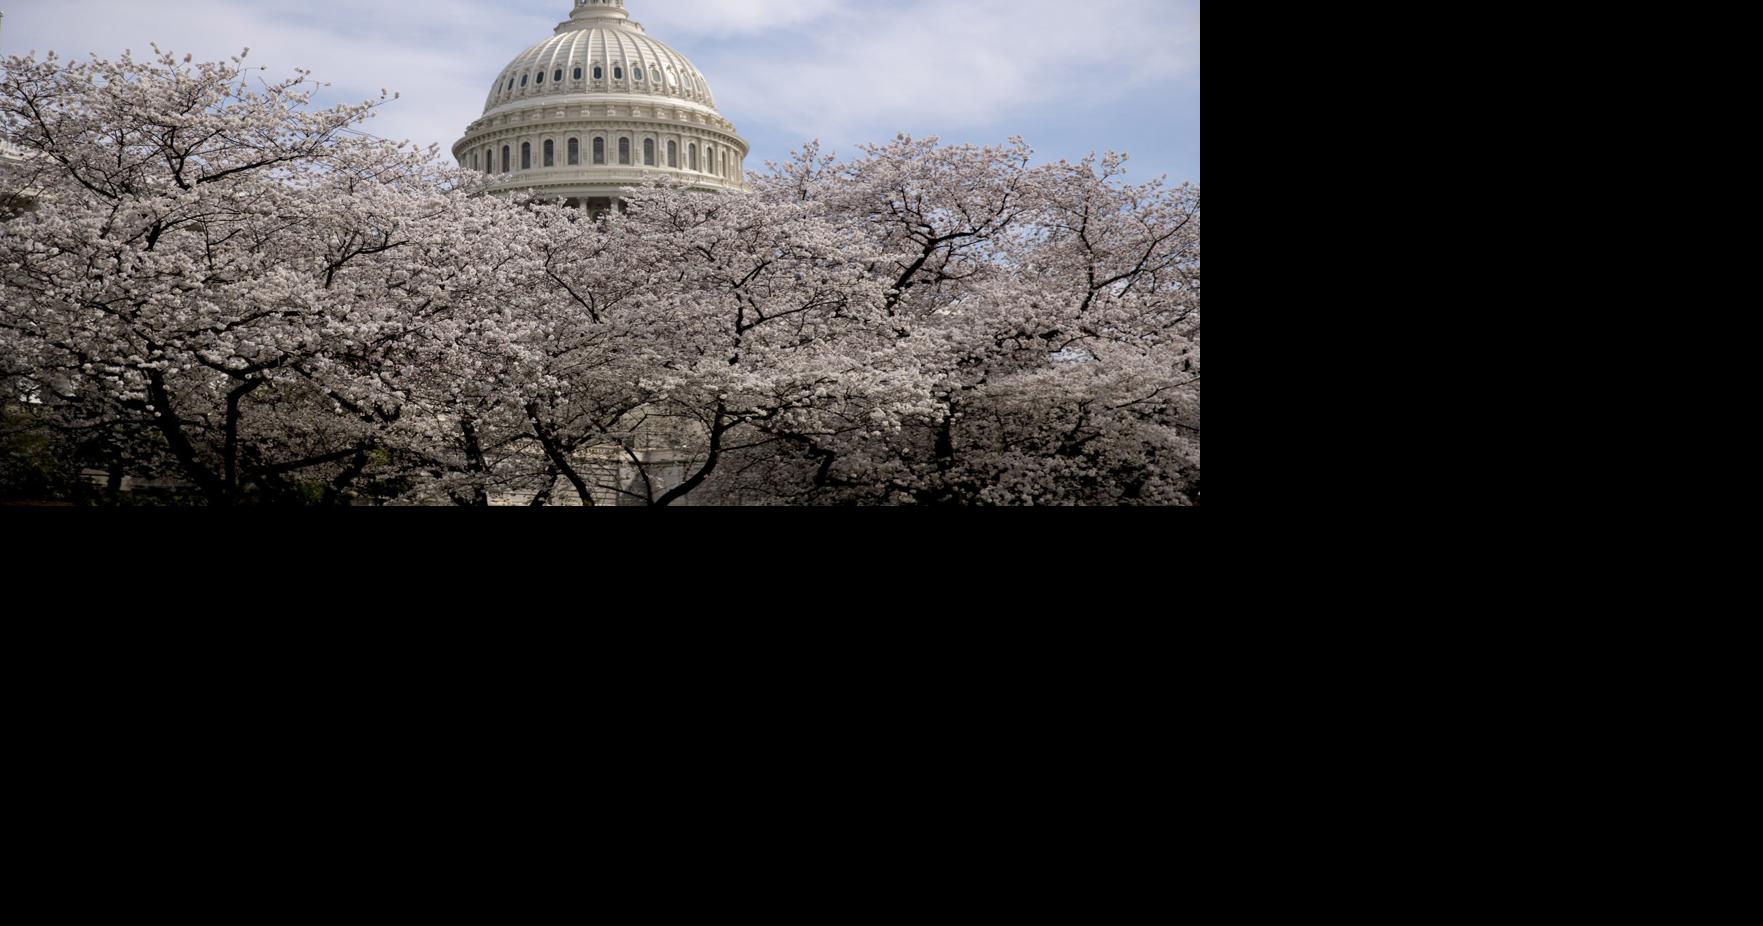 Washington Capitals announce first cherry blossoms jersey